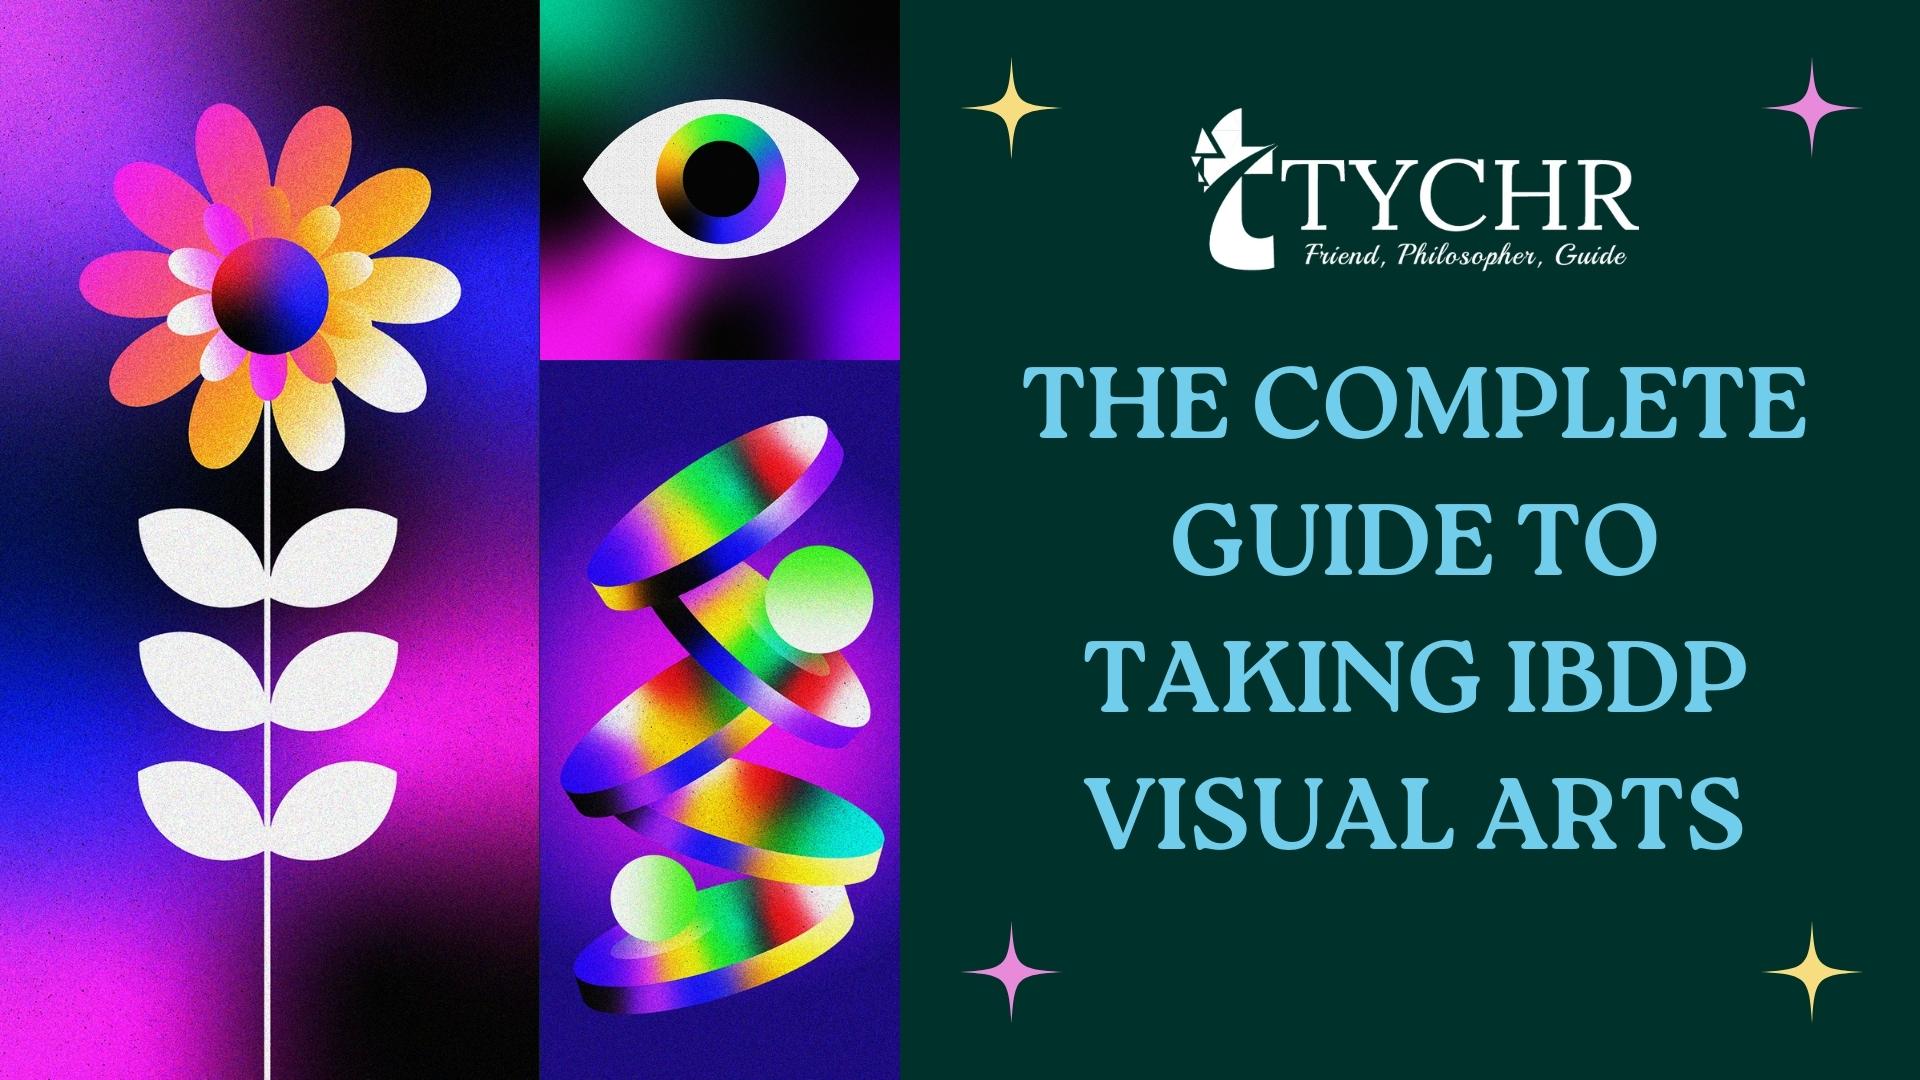 You are currently viewing The Complete Guide to taking IBDP Visual Arts